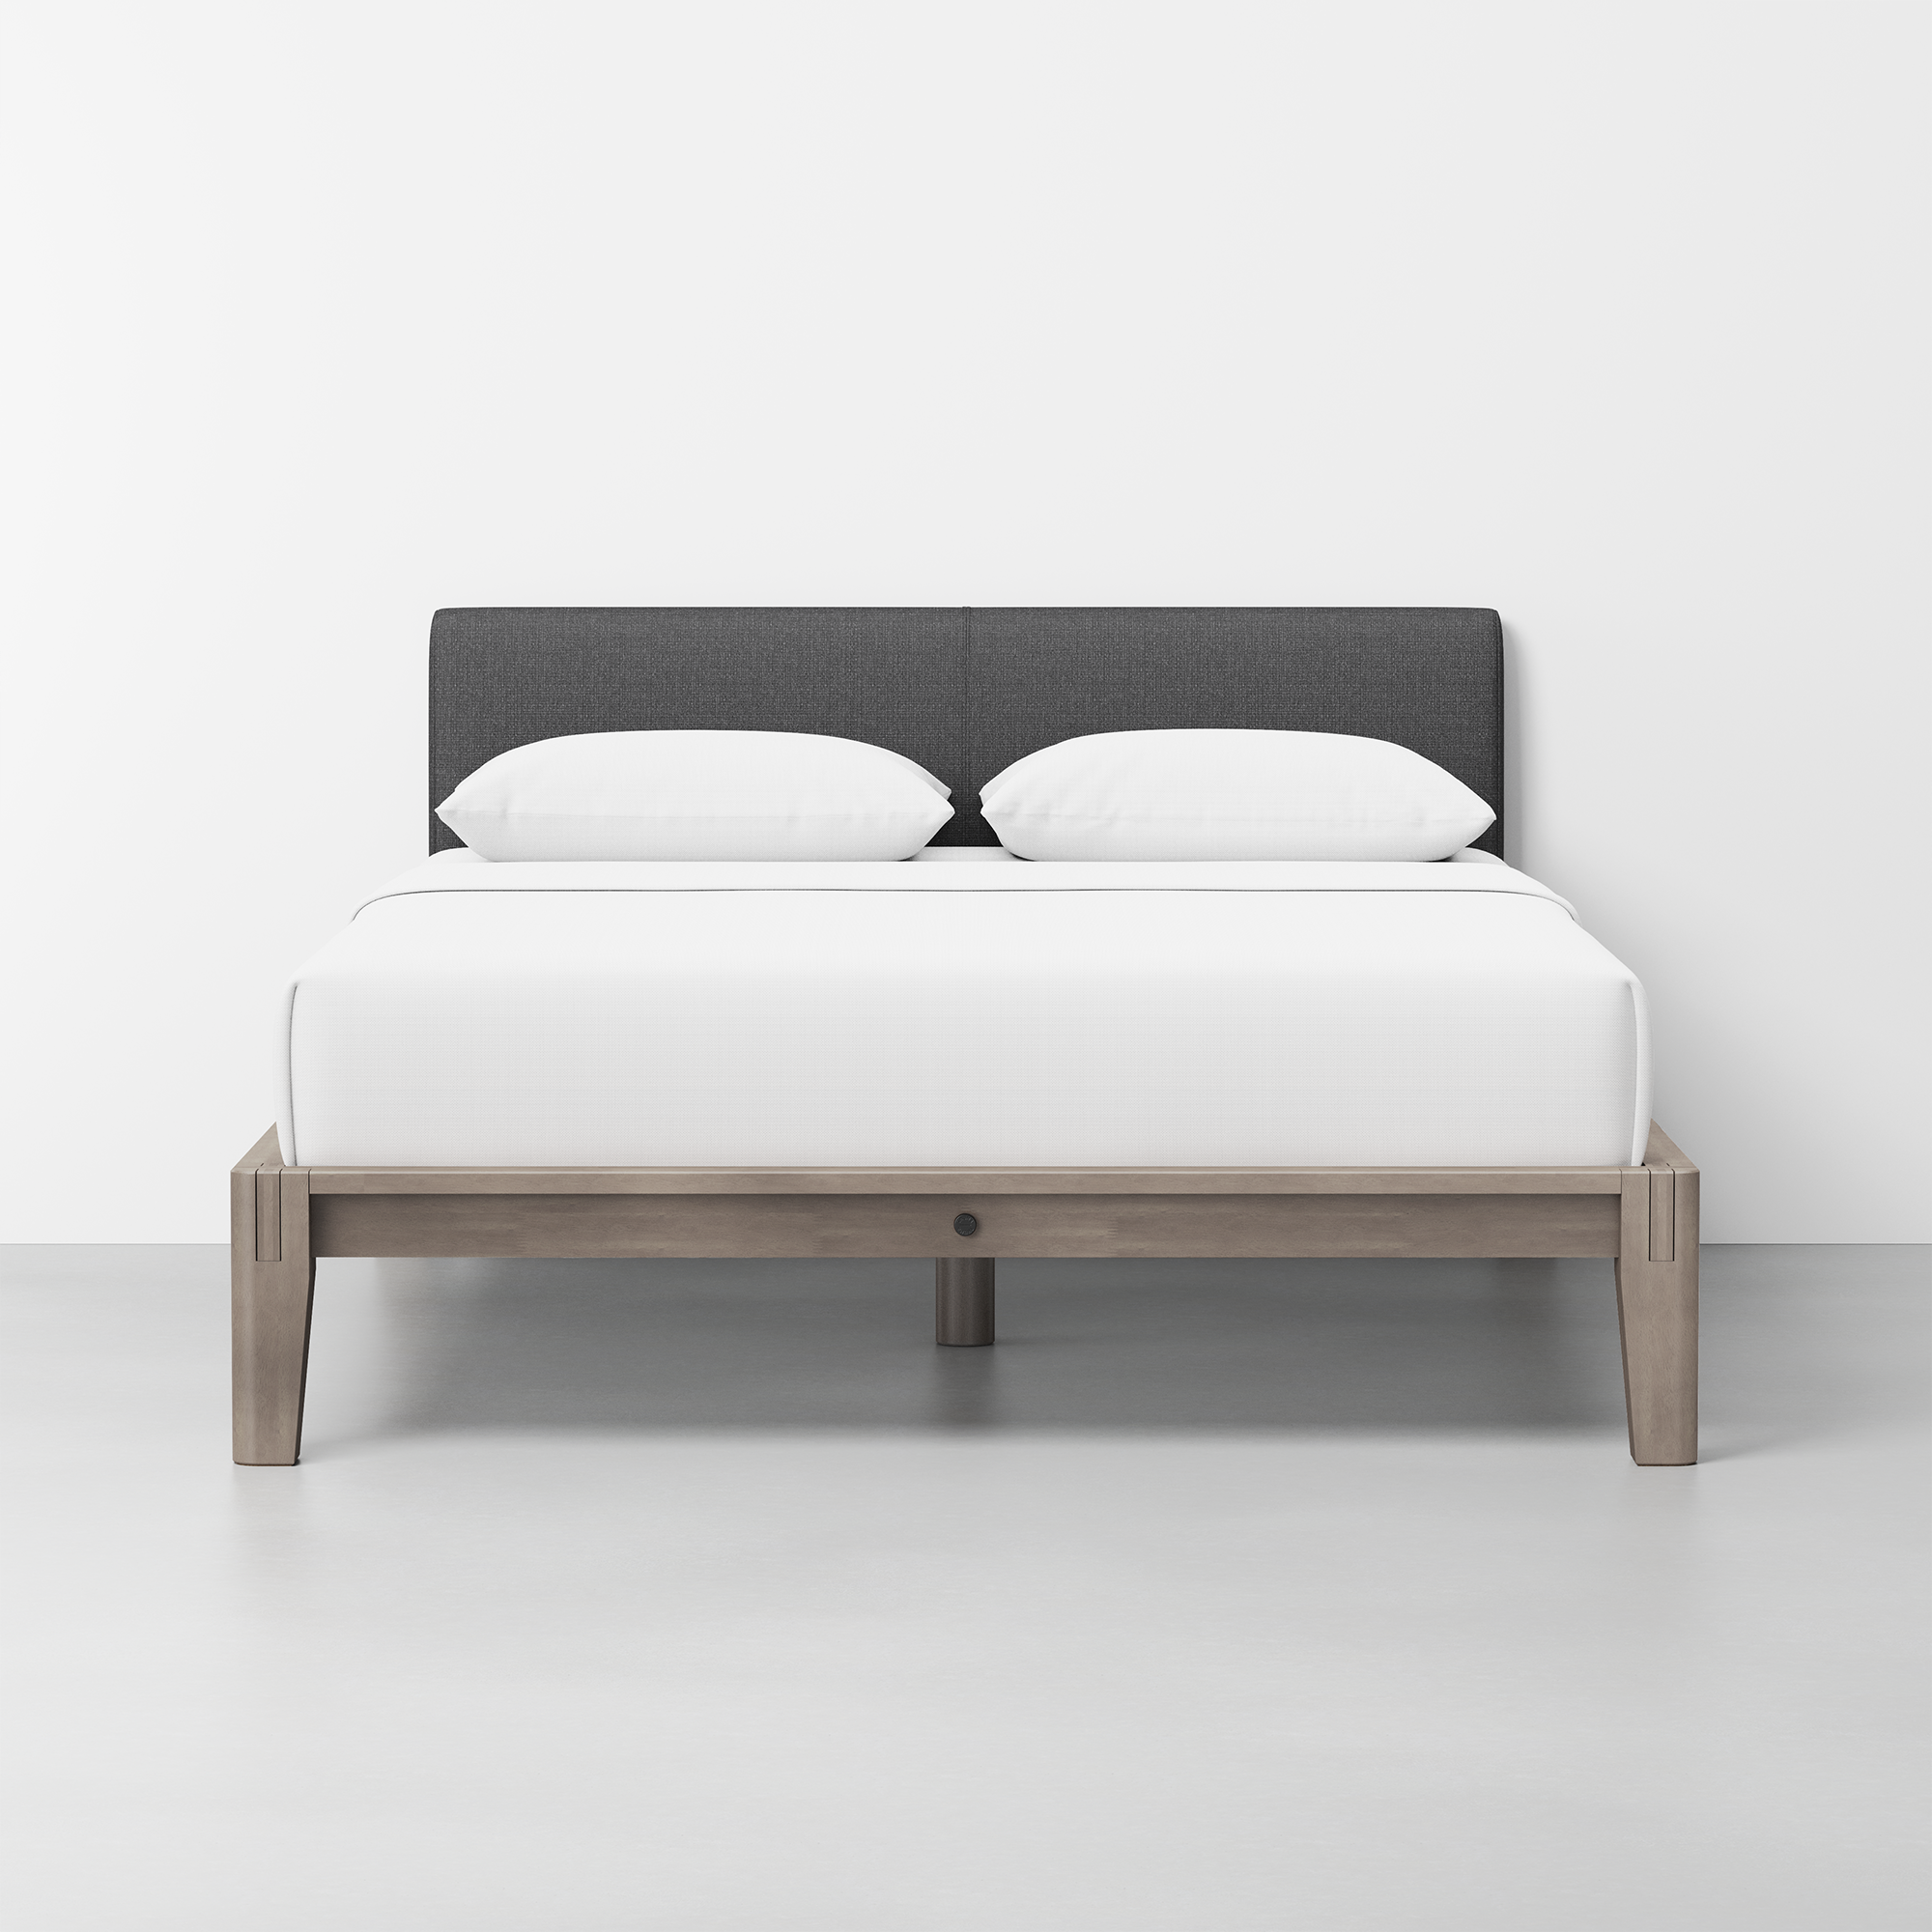 The Bed (Grey / Dark Charcoal) - Render - Front